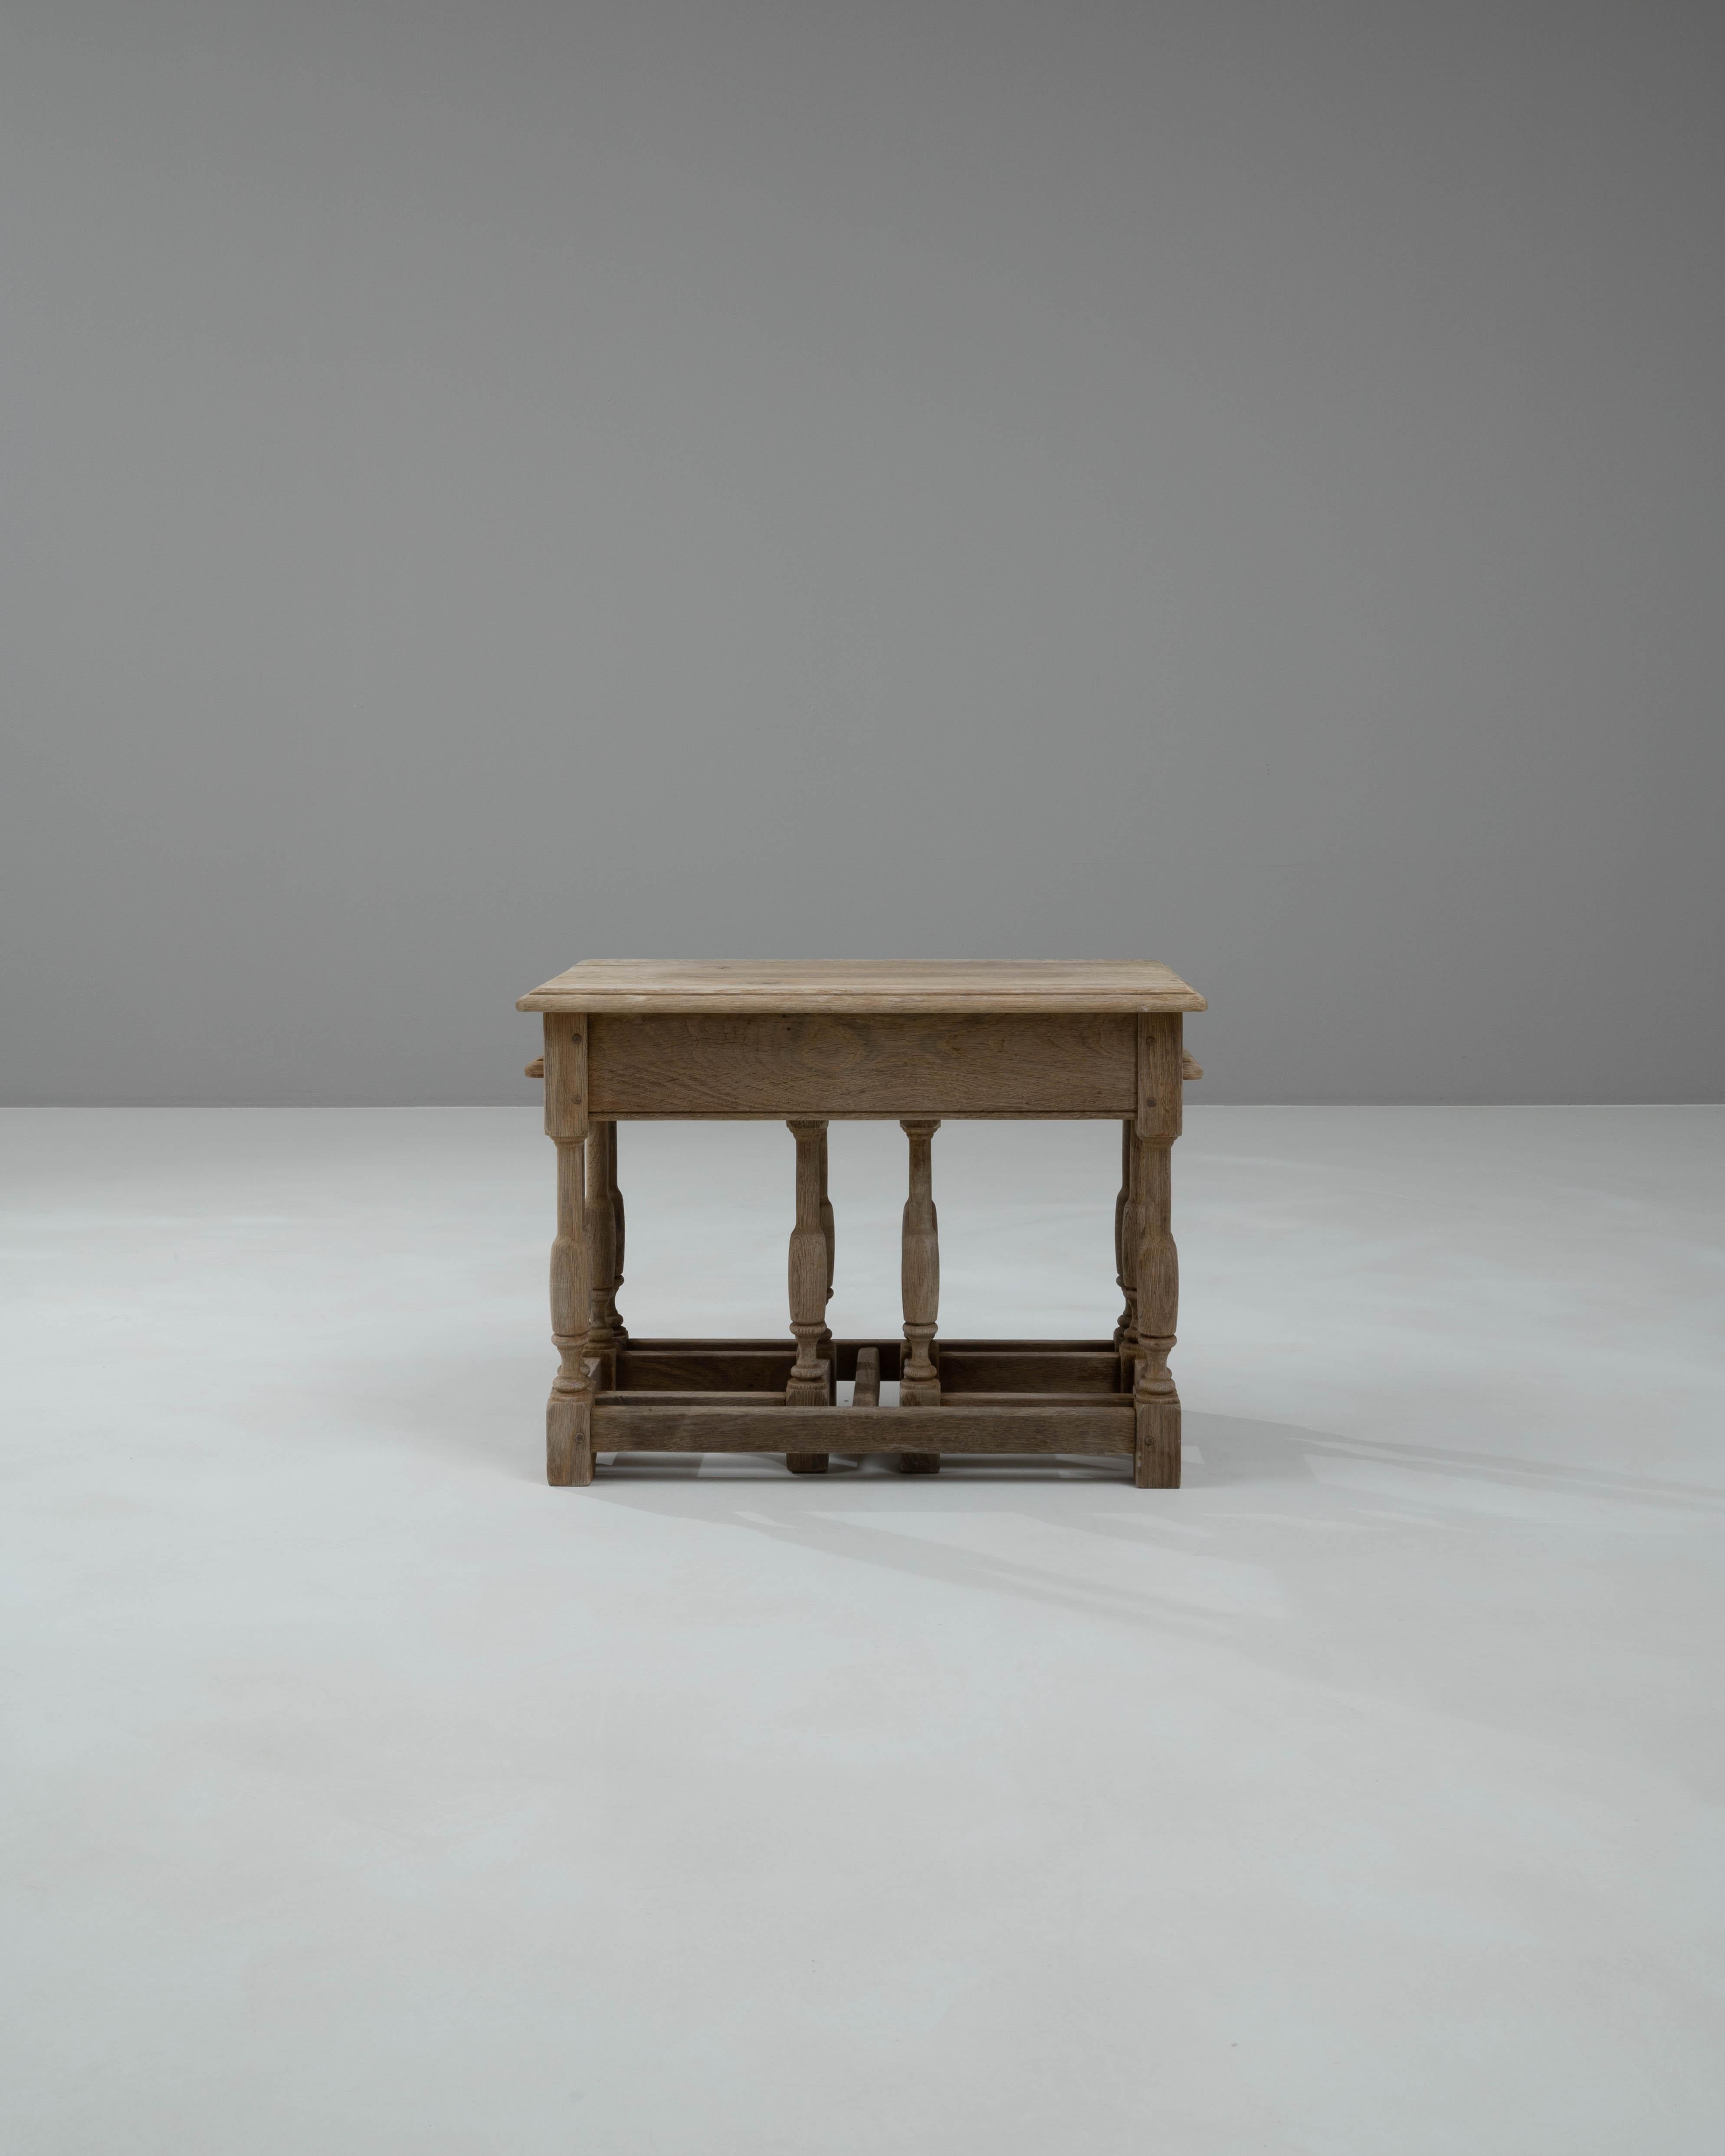 Enhance your home with the versatility and timeless elegance of this set of three 20th-century Belgian nesting tables. Crafted from exquisite bleached oak, each table showcases a unique yet harmonious design, featuring beautifully turned legs and a